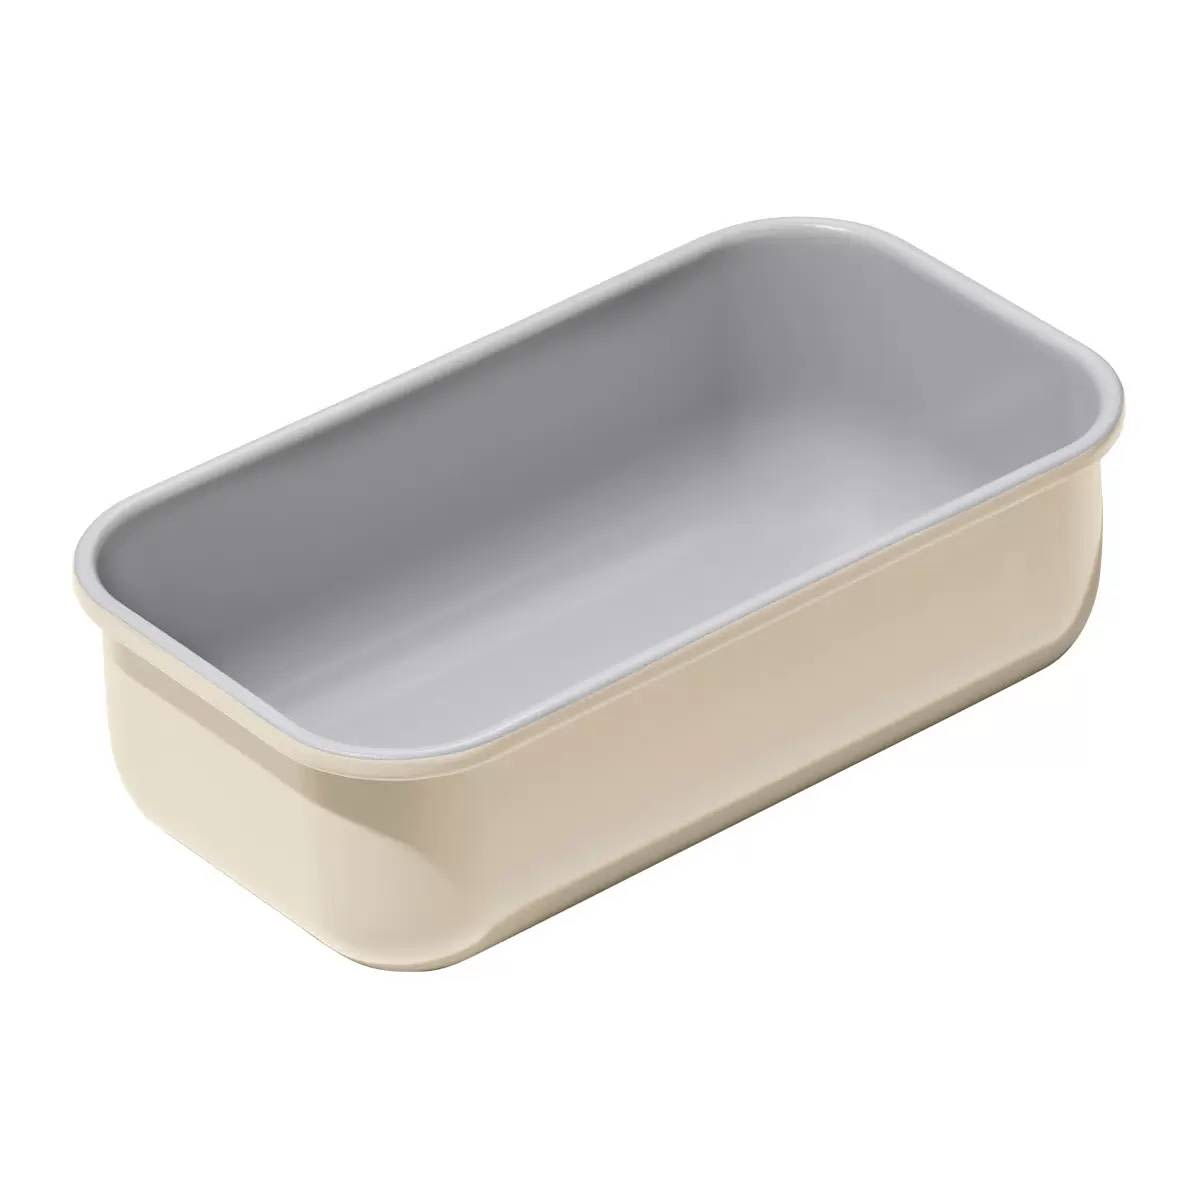 Review of #CARAWAY Loaf Pan by Payton, 2 votes